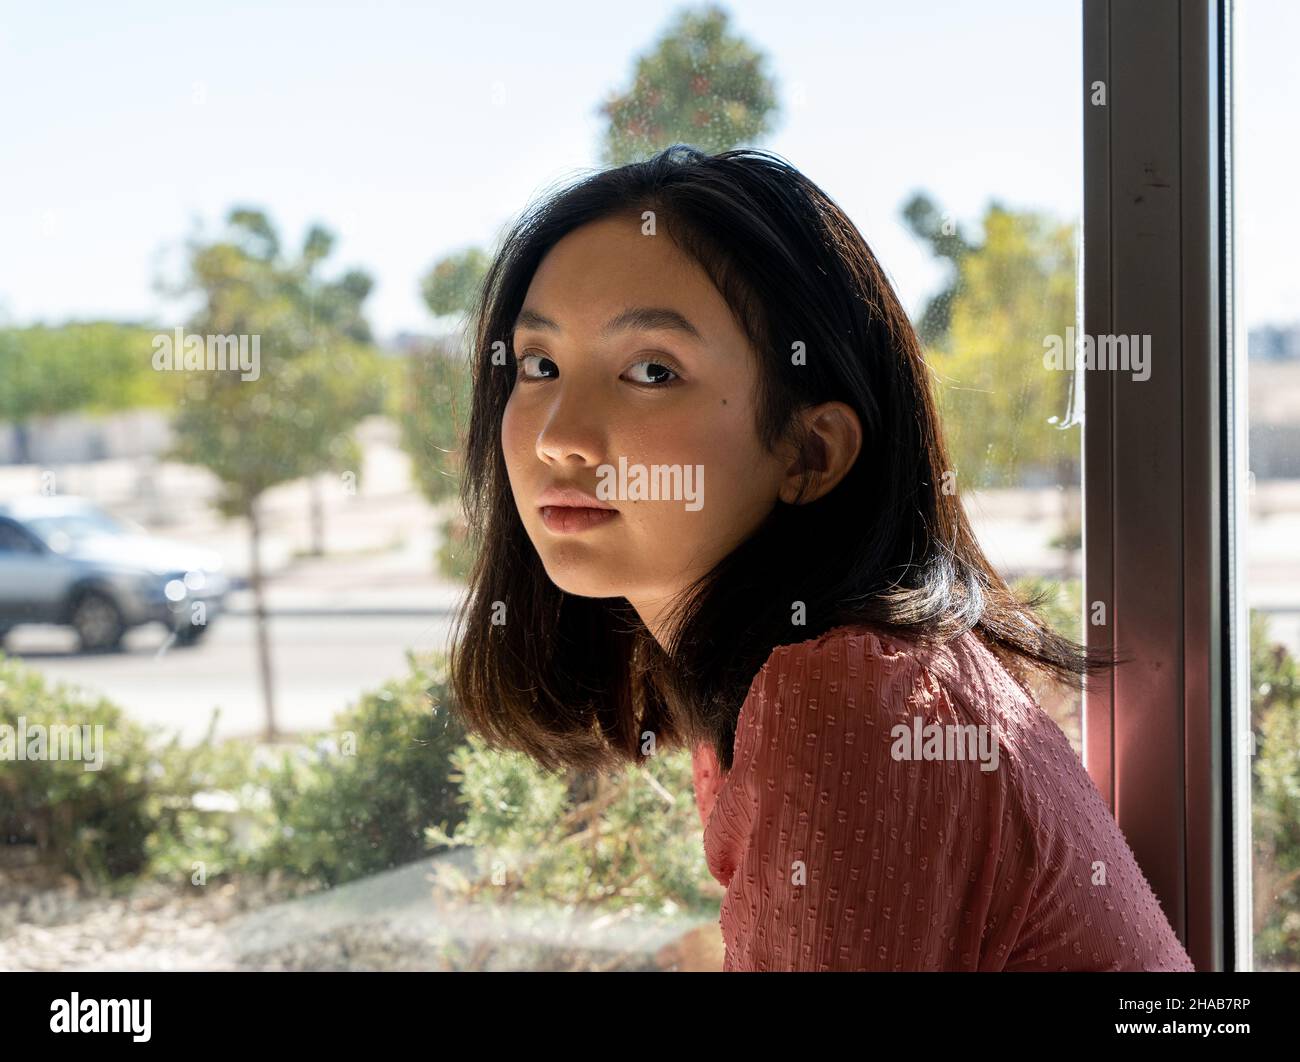 portrait of an Asian woman looking at the camera next to the window, horizontal urban background Stock Photo